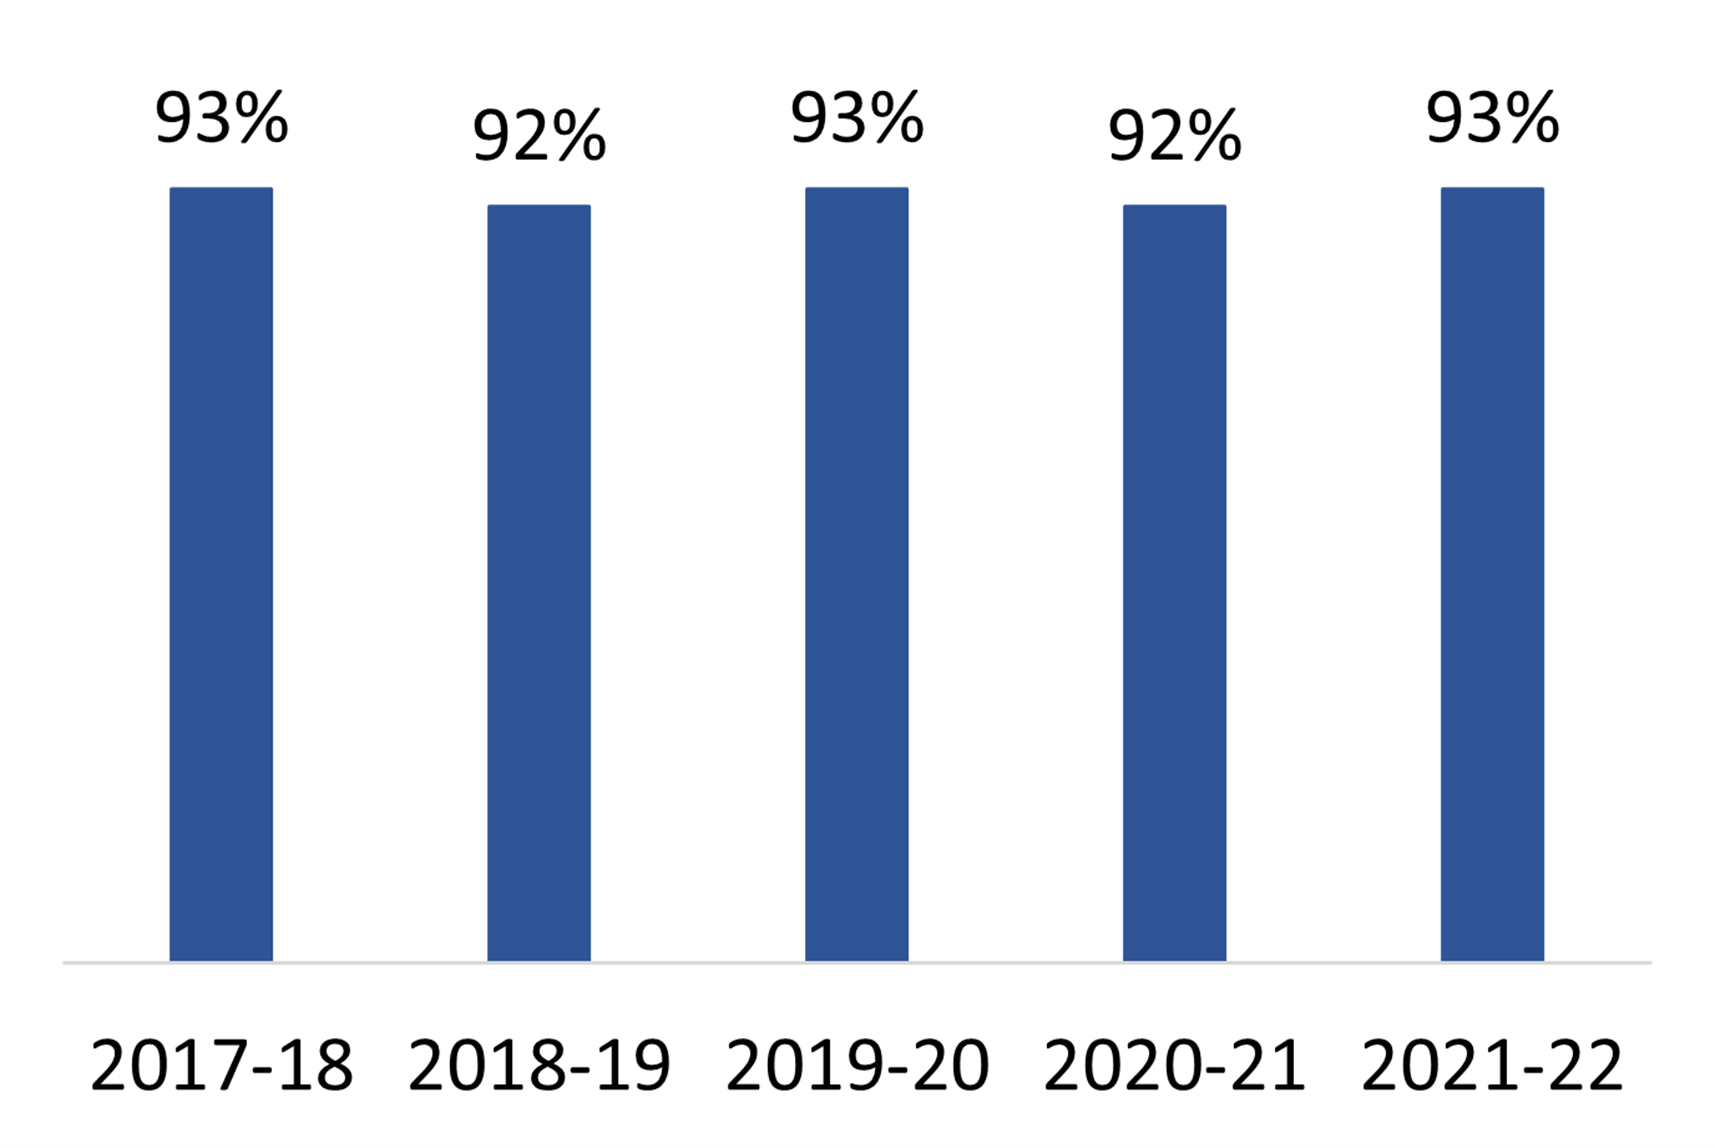 One bar chart showing values of high school graduation rates between the 2017-18 and 2021-22 school years. The 2017-18 percentage was 93%. The 2018-19 percentage was 92%. The 2019-20 percentage was 93%. The 2020-21 percentage was 92%. The 2021-22 percentage was 93%.